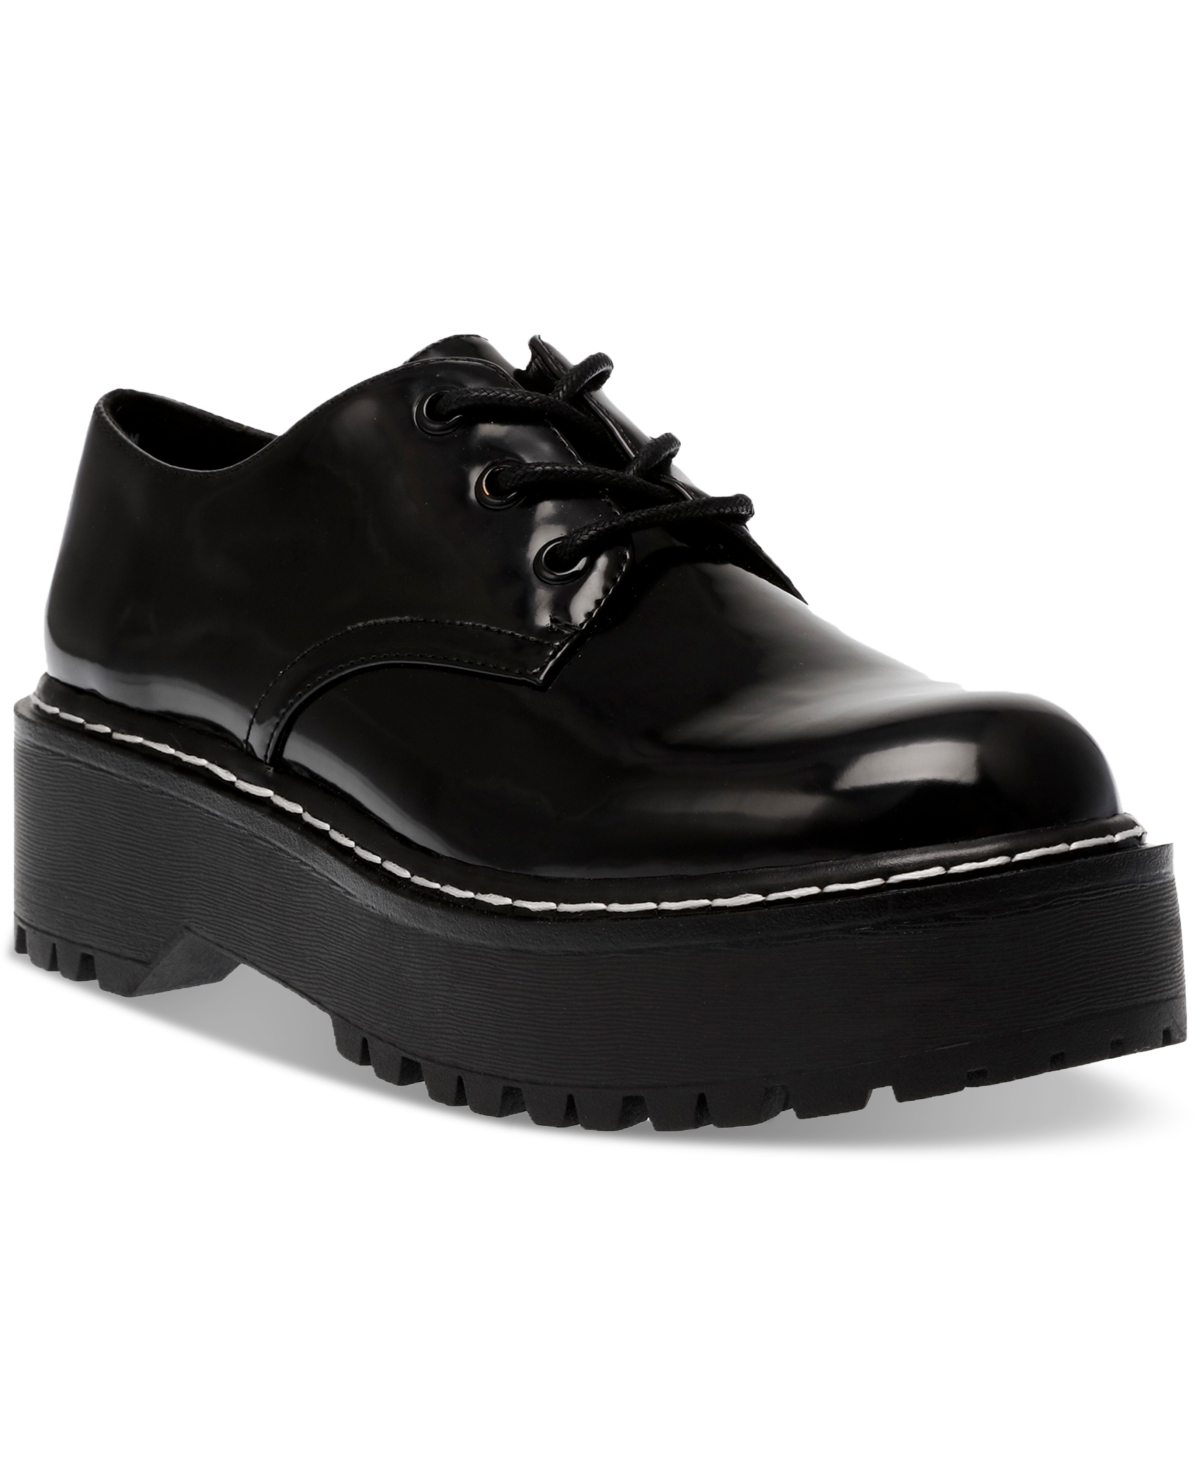 Authentick Lug Oxfords, Created for Macy's - Black Smooth